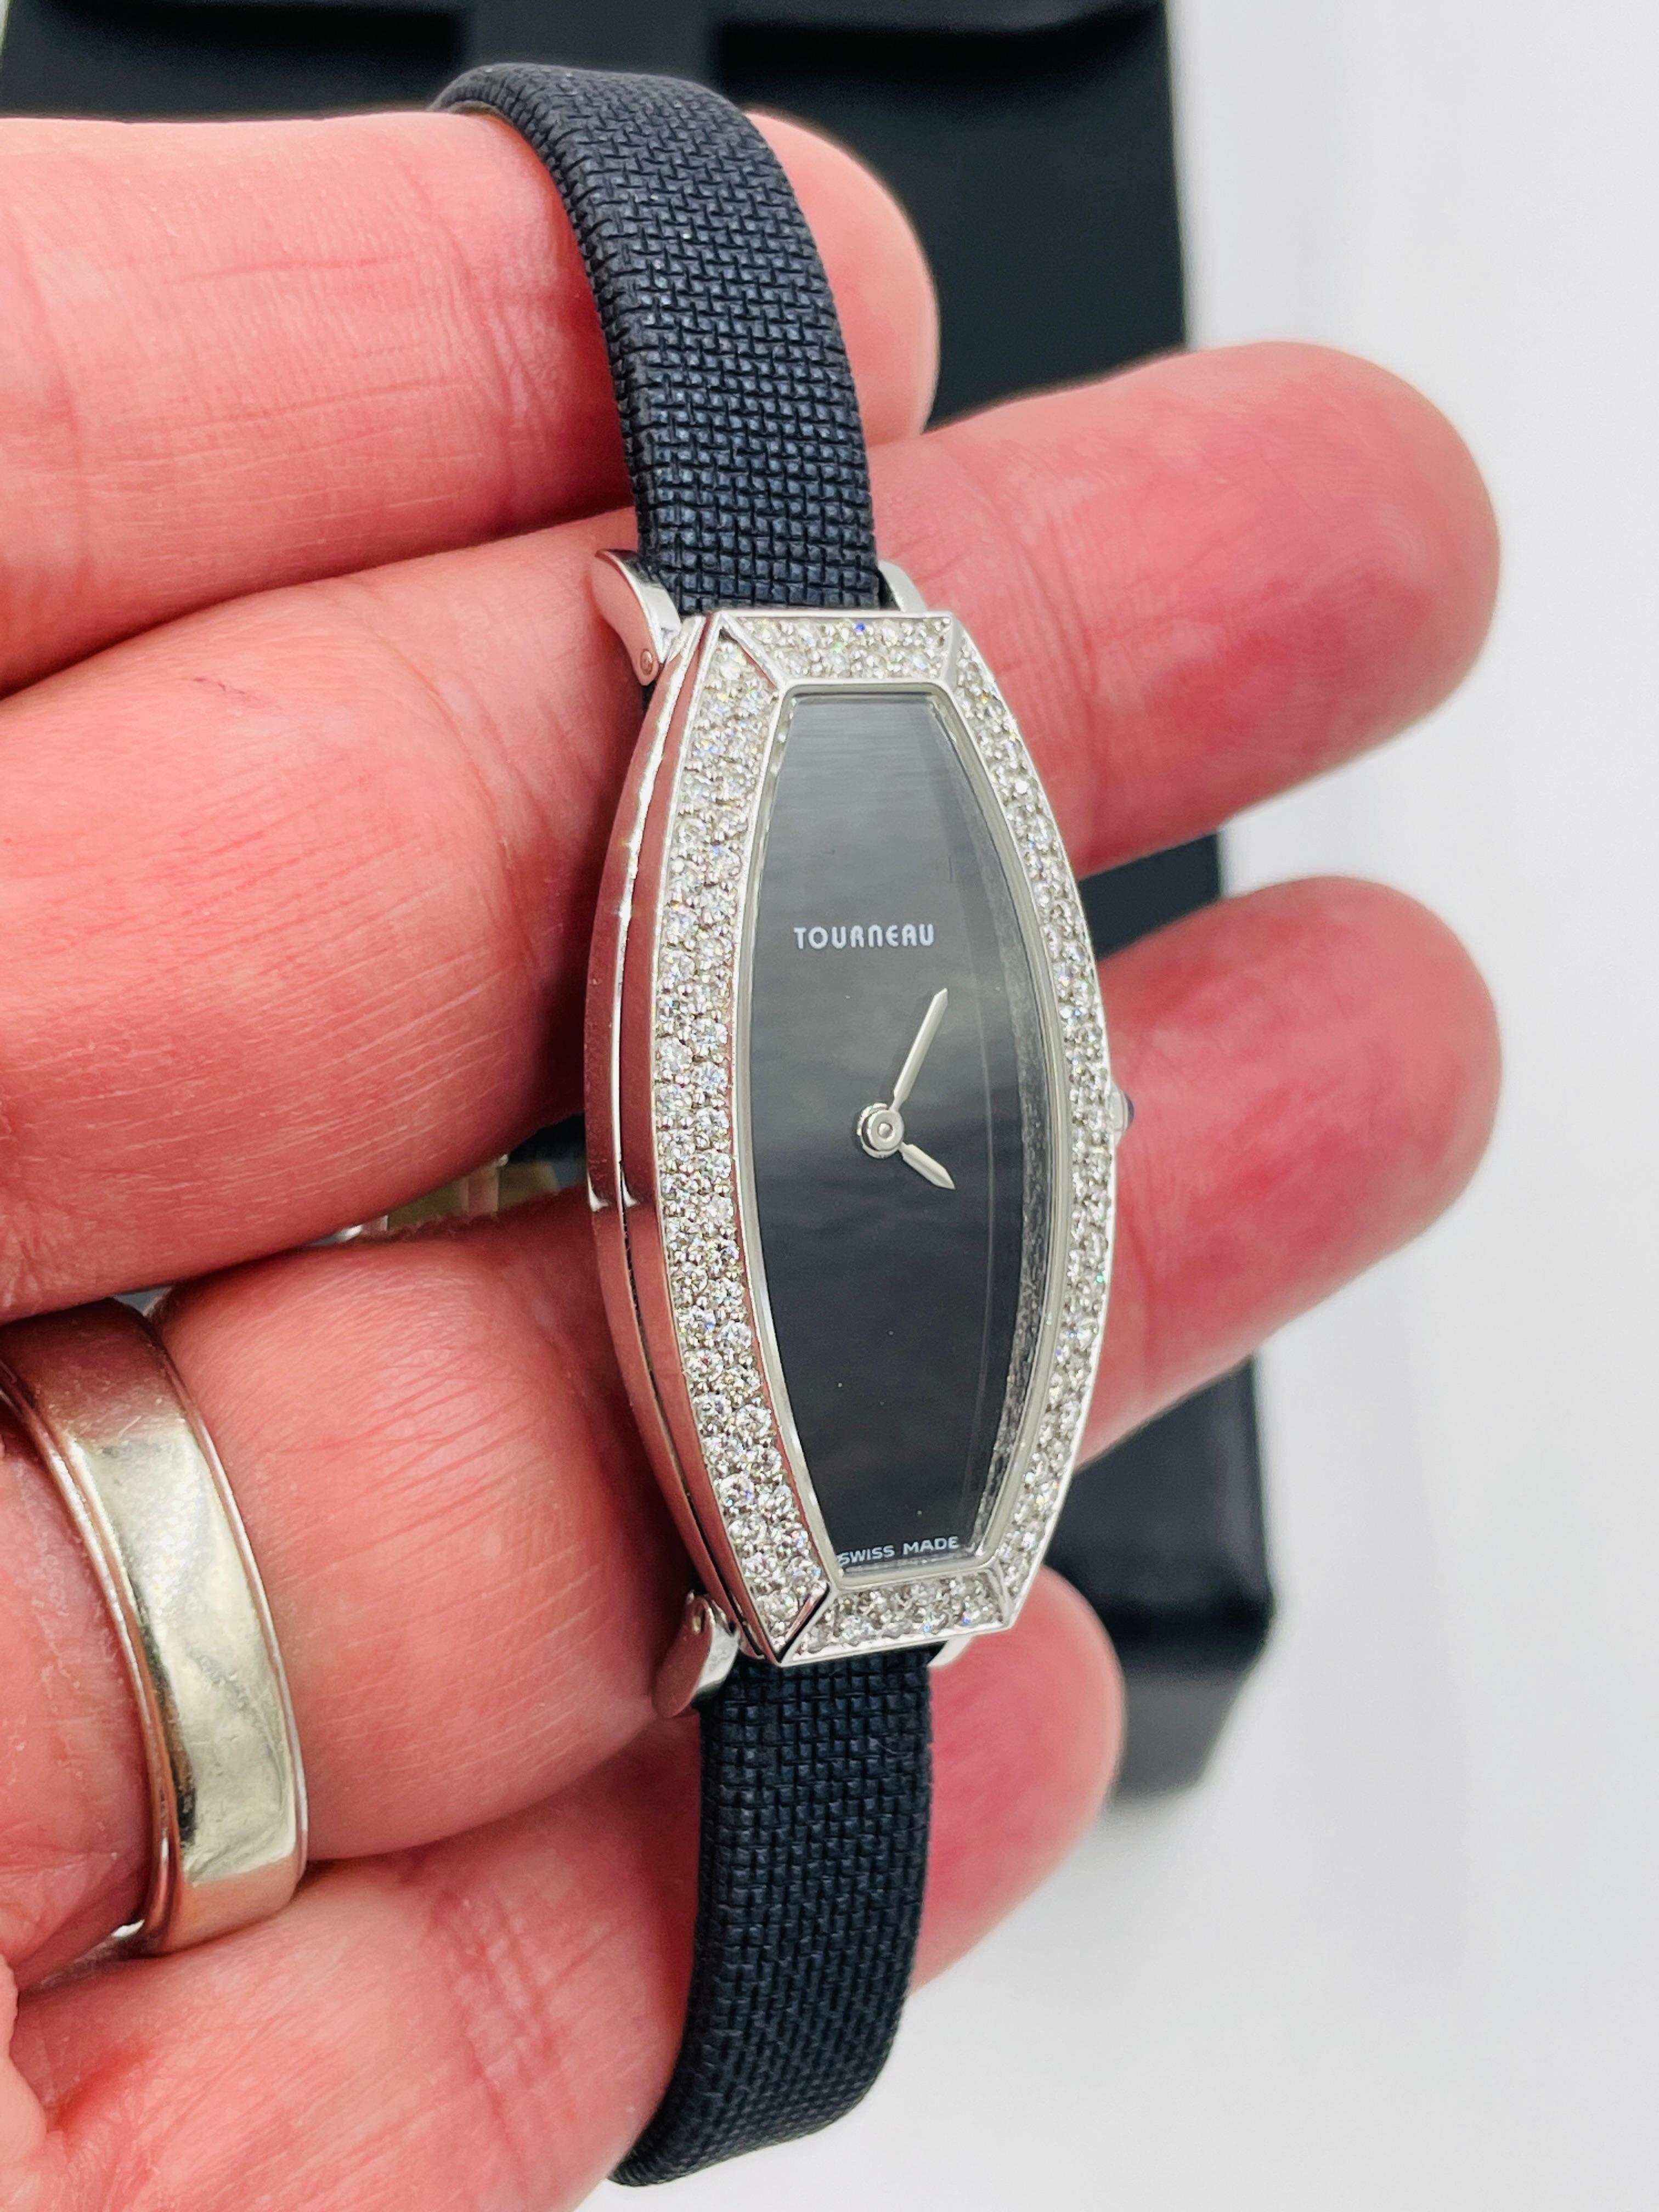 Ladies Tourneau Diamond White Gold Wristwatch with a black strap.
In beautiful condition this ladies Tourneau 18k White Gold Watch measures approximately 1